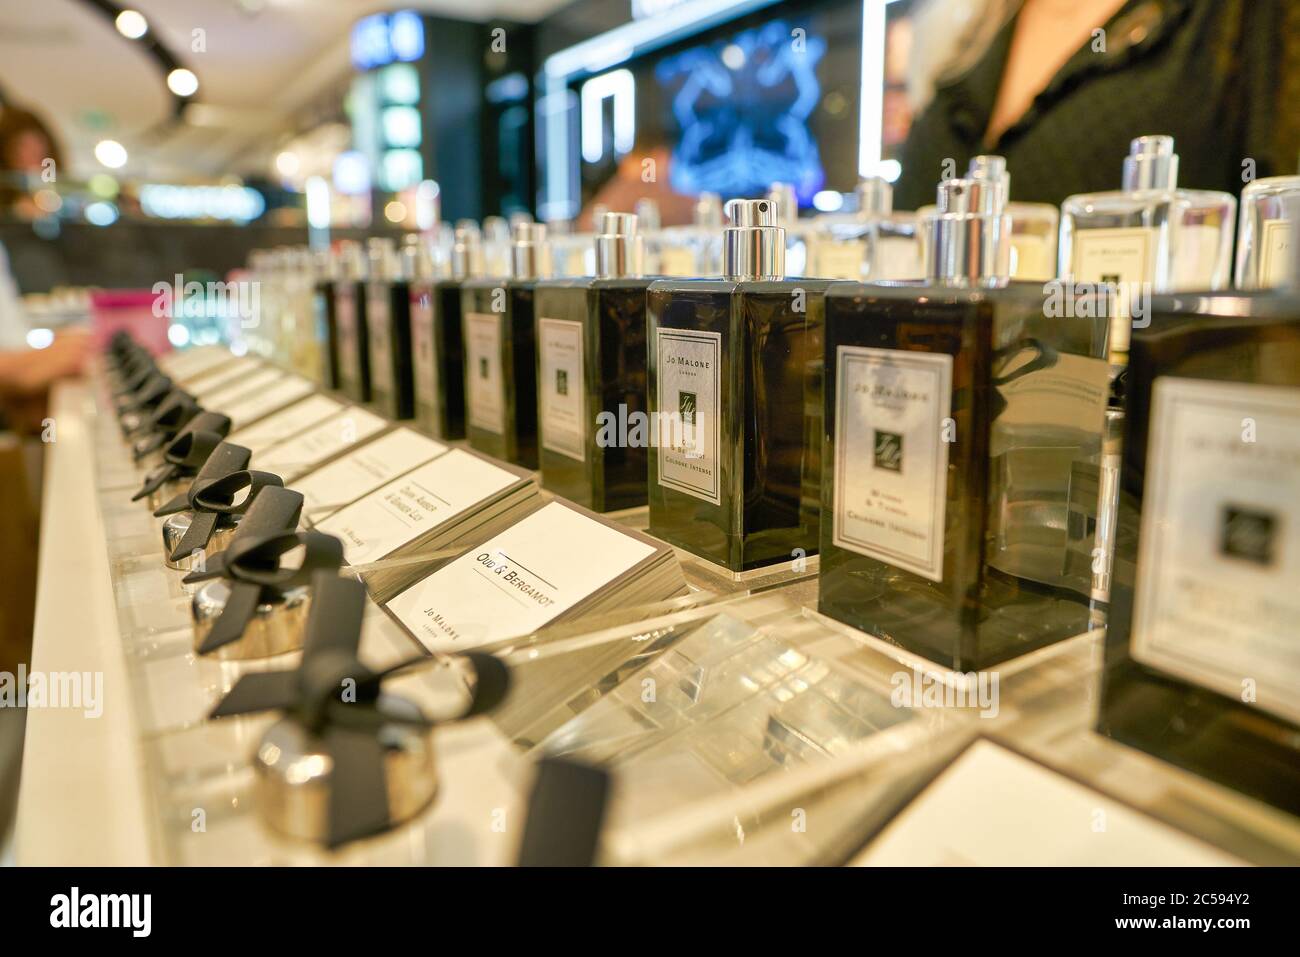 BERLIN, GERMANY - CIRCA SEPTEMBER, 2019: Jo Malone products on display ...